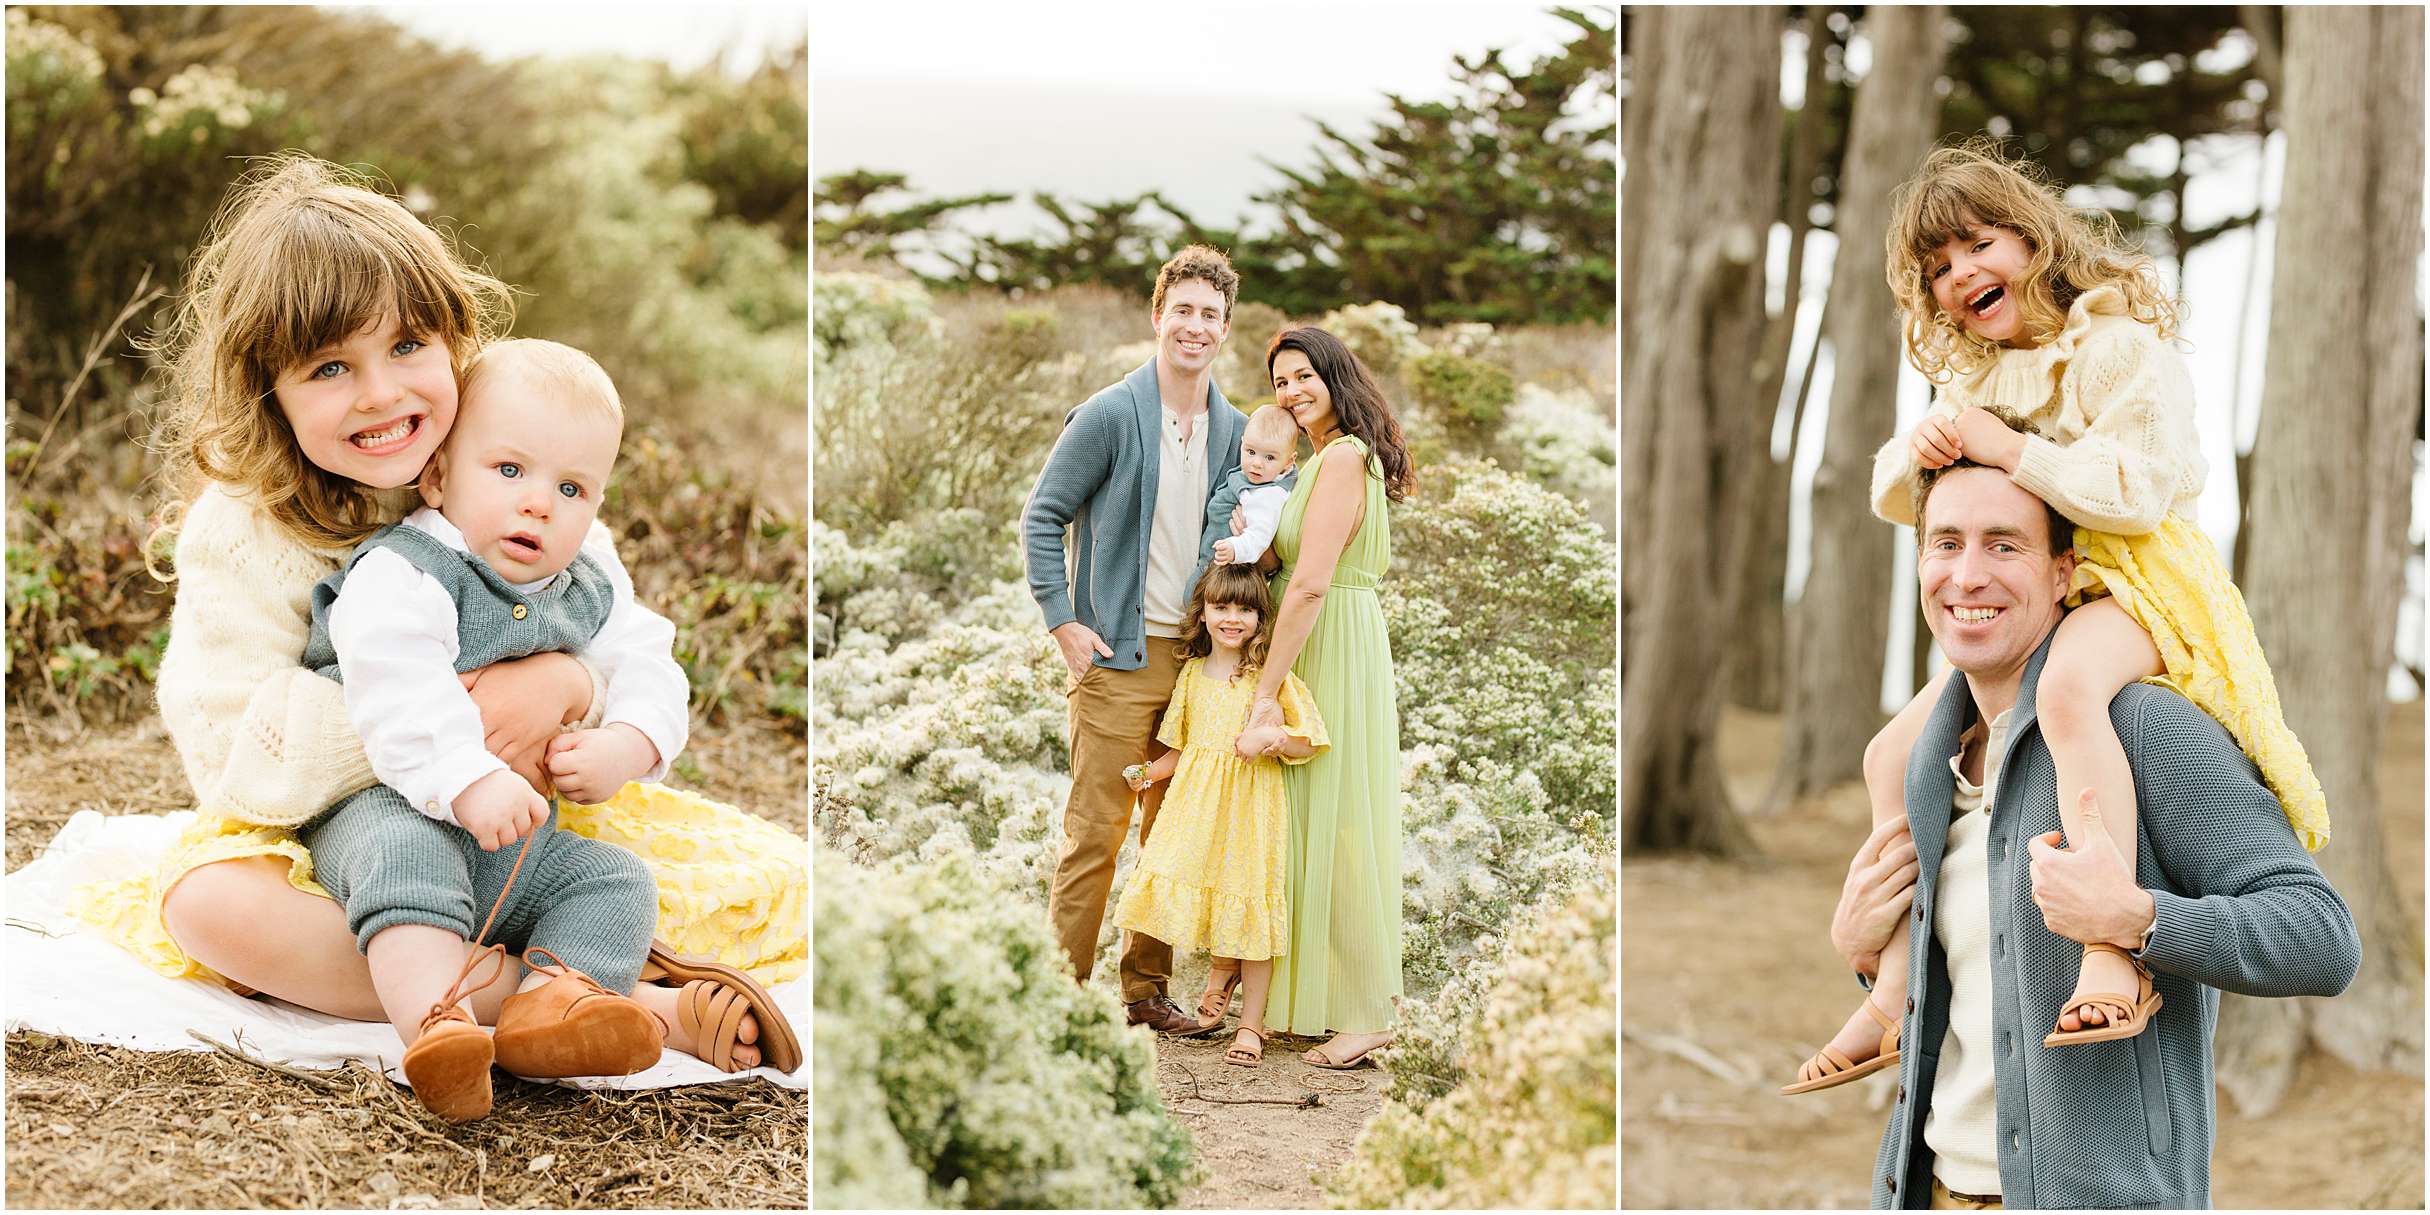 Lands End and Sutro Baths Family Photography San Francisco Photography locations